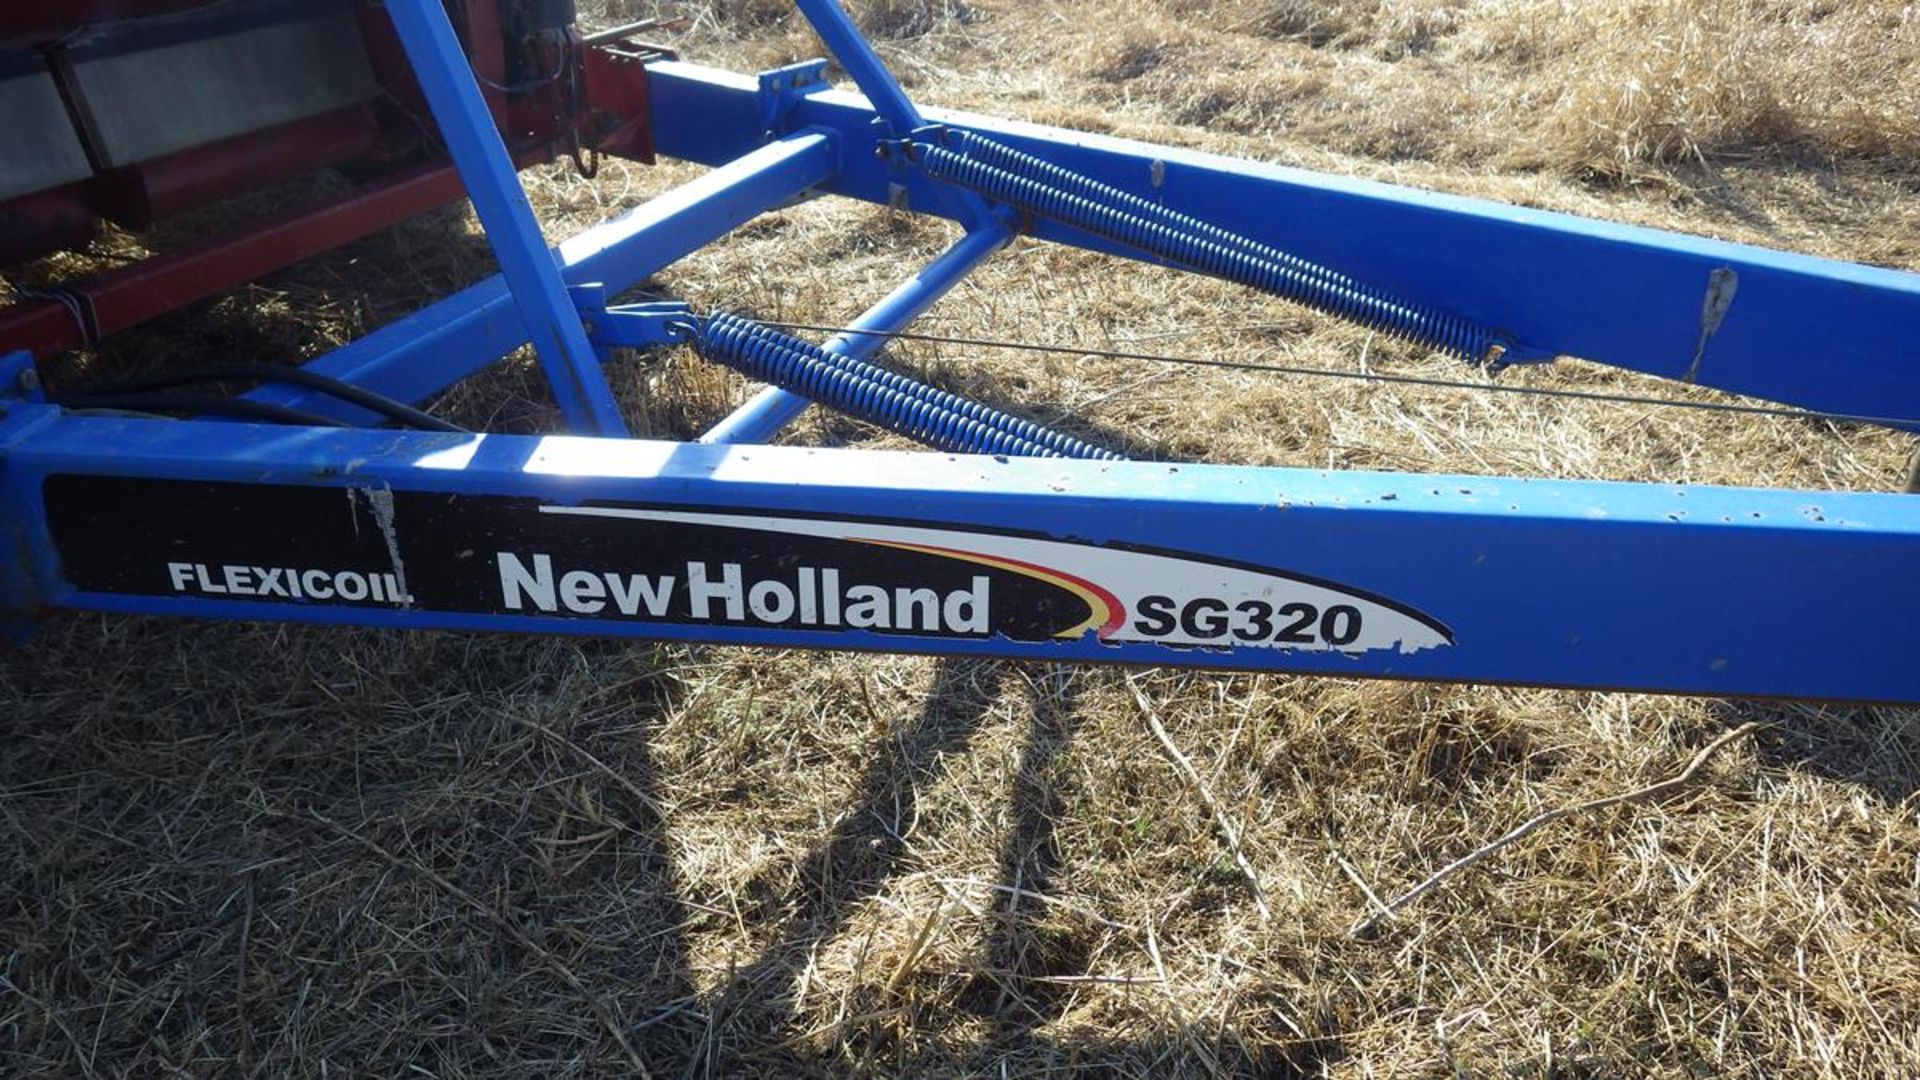 Monitor Included! New Holland SG320 Heavy harrows Vin# PNL019050 approx 84' with Valmar 3255 - Image 2 of 8